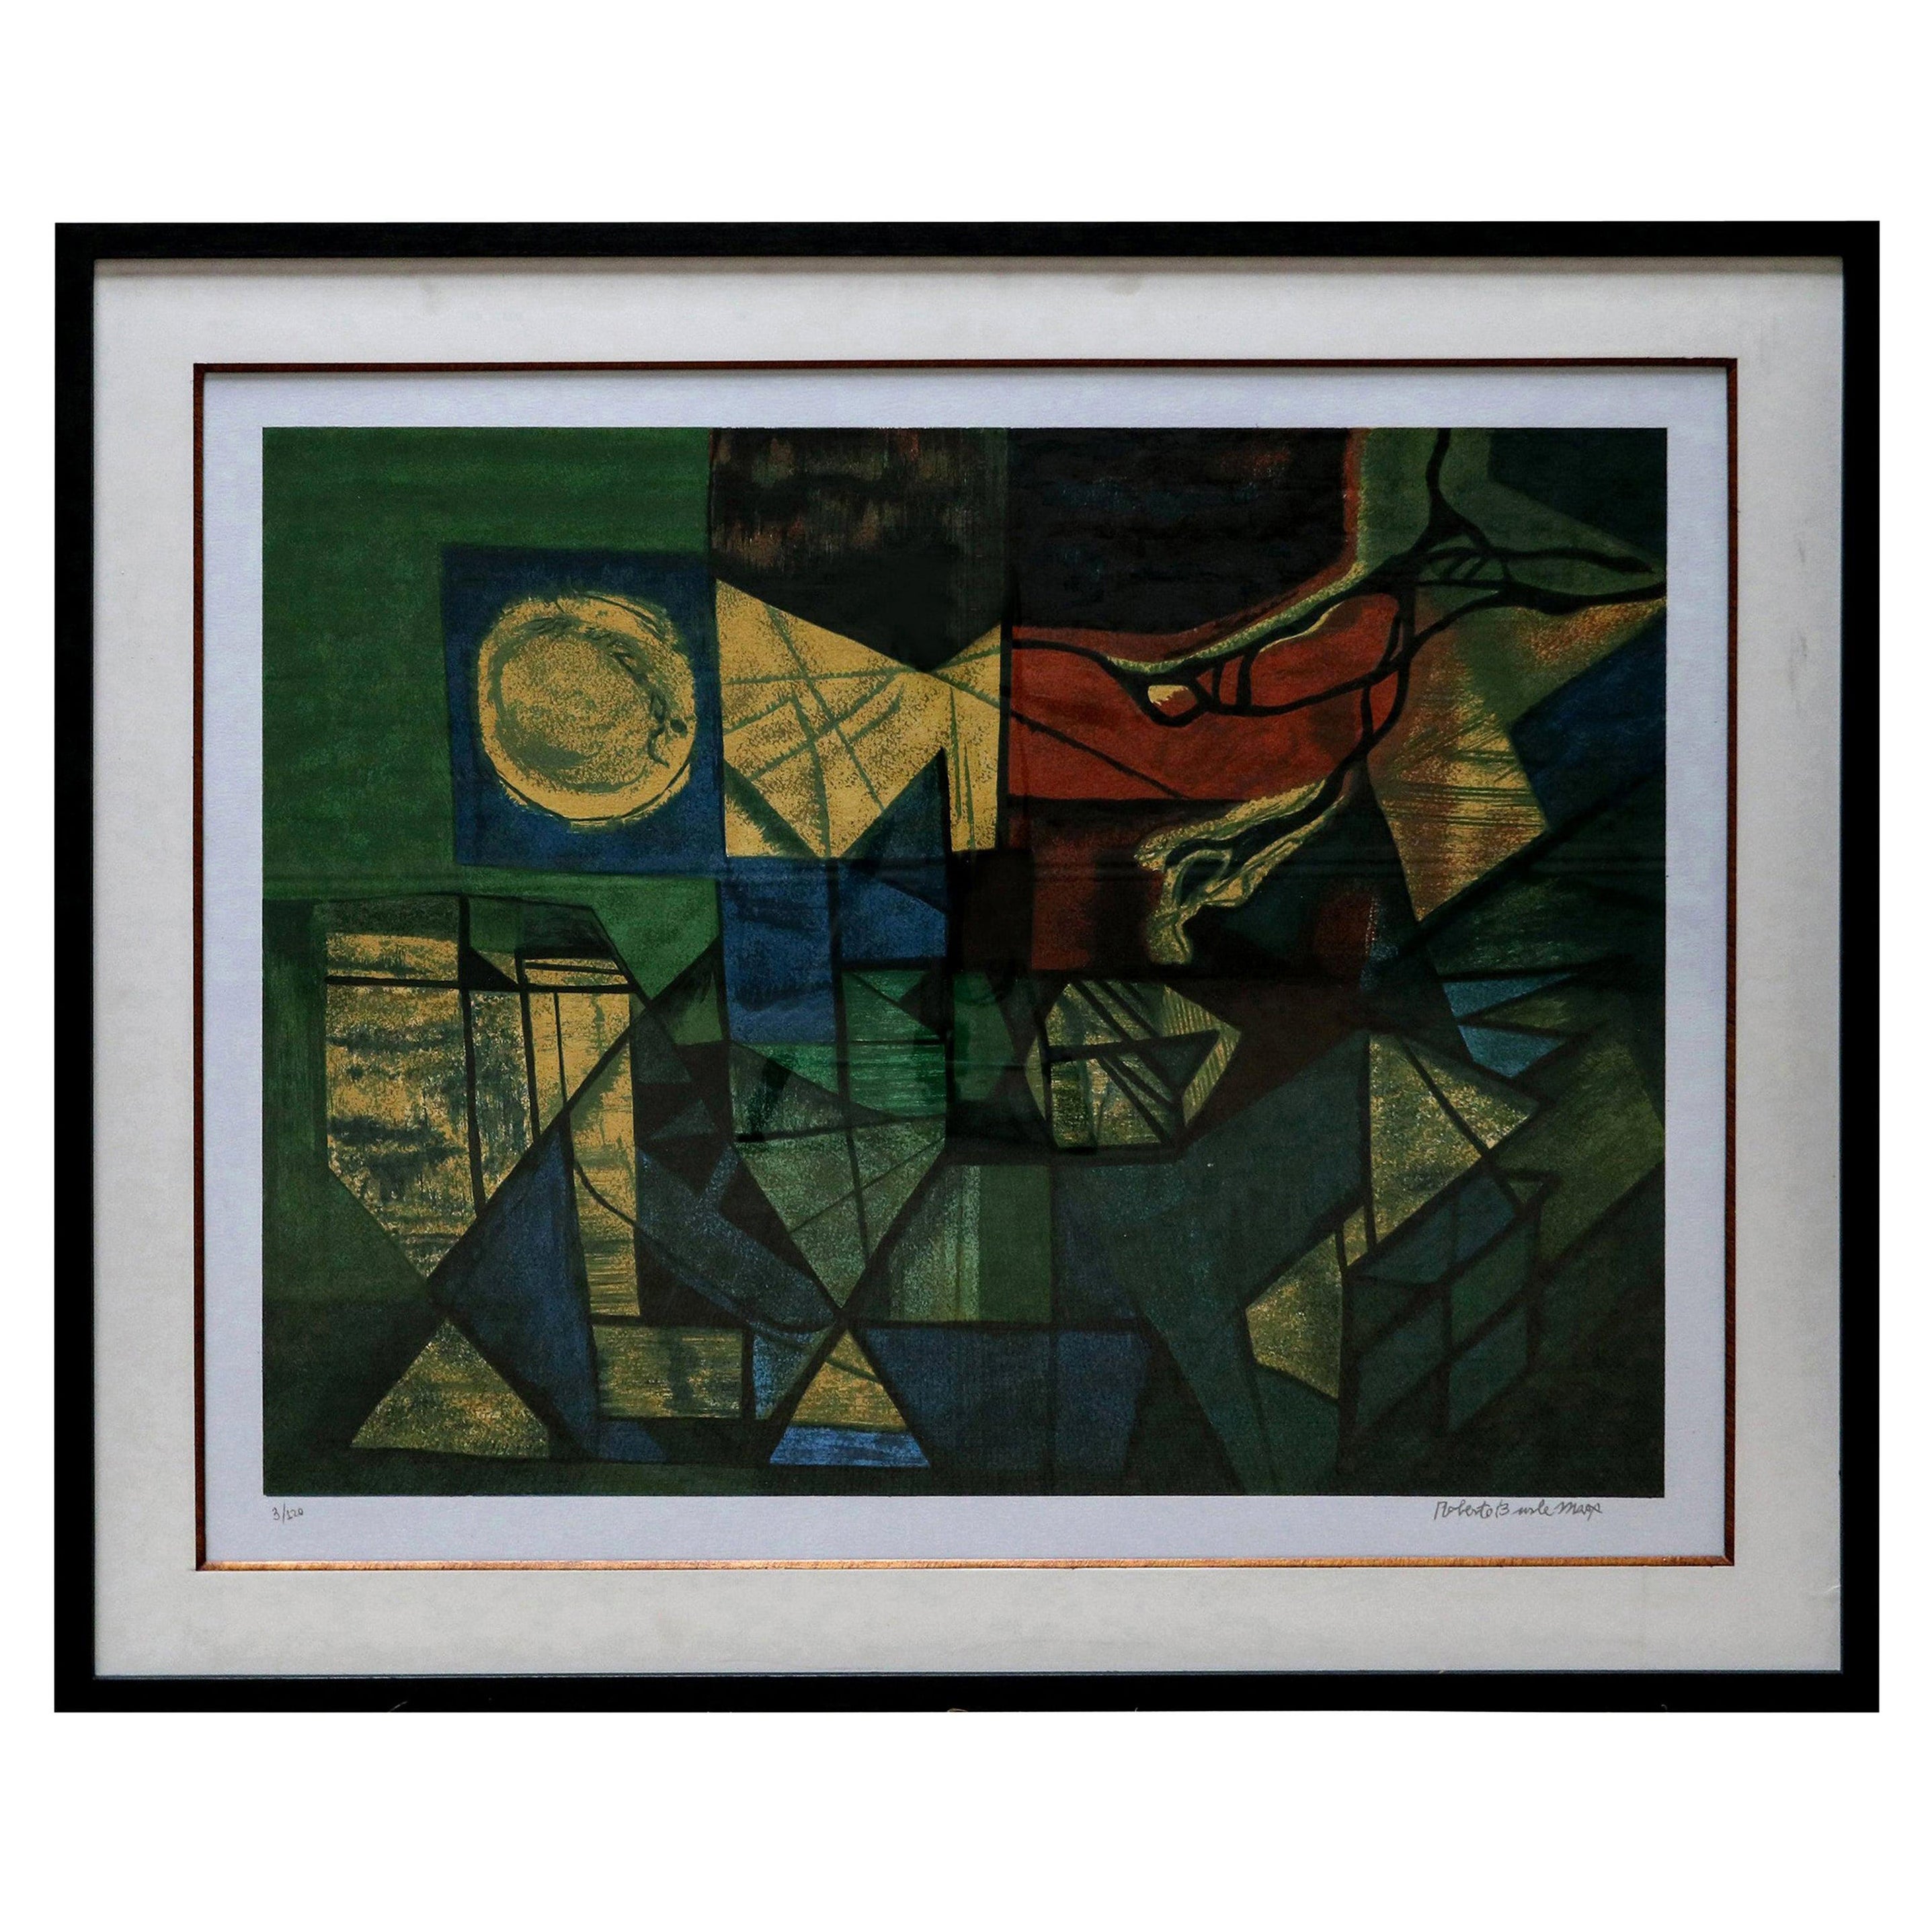 Roberto Burle Marx Abstract Print in Green and Yellow, 1960s For Sale